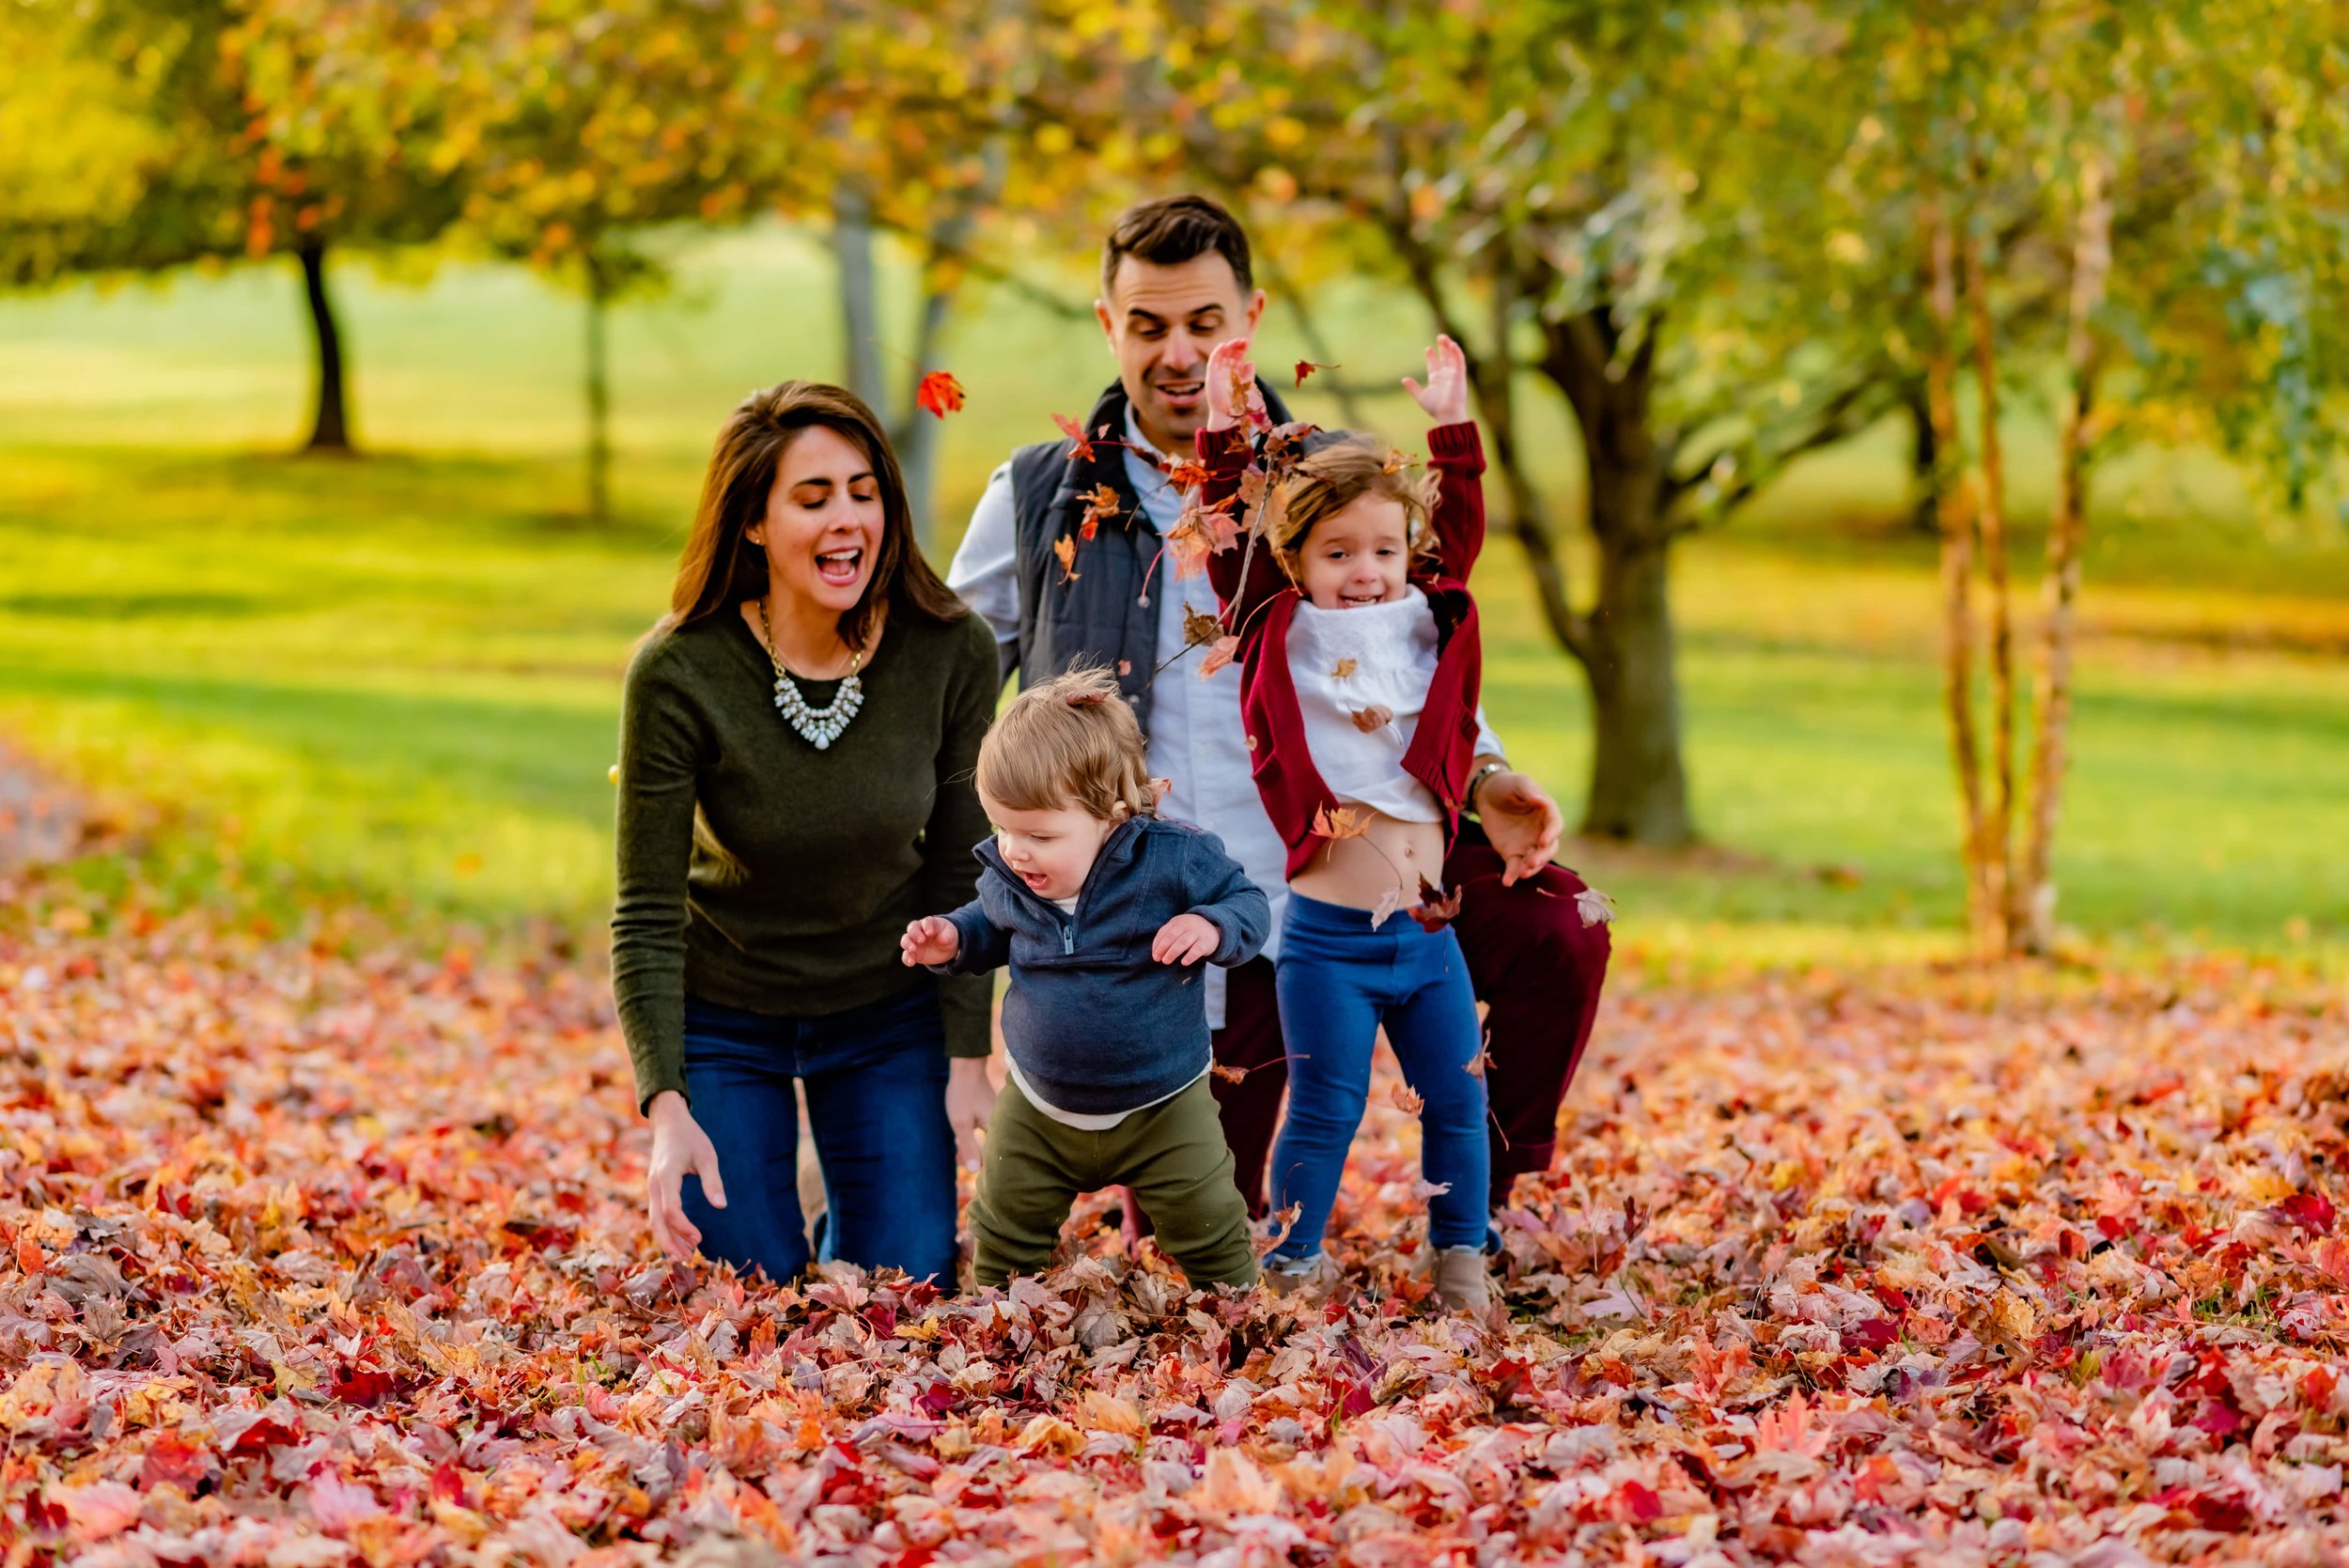 Maryland Family Fall Photo - Laughing and Playing in the Leaves